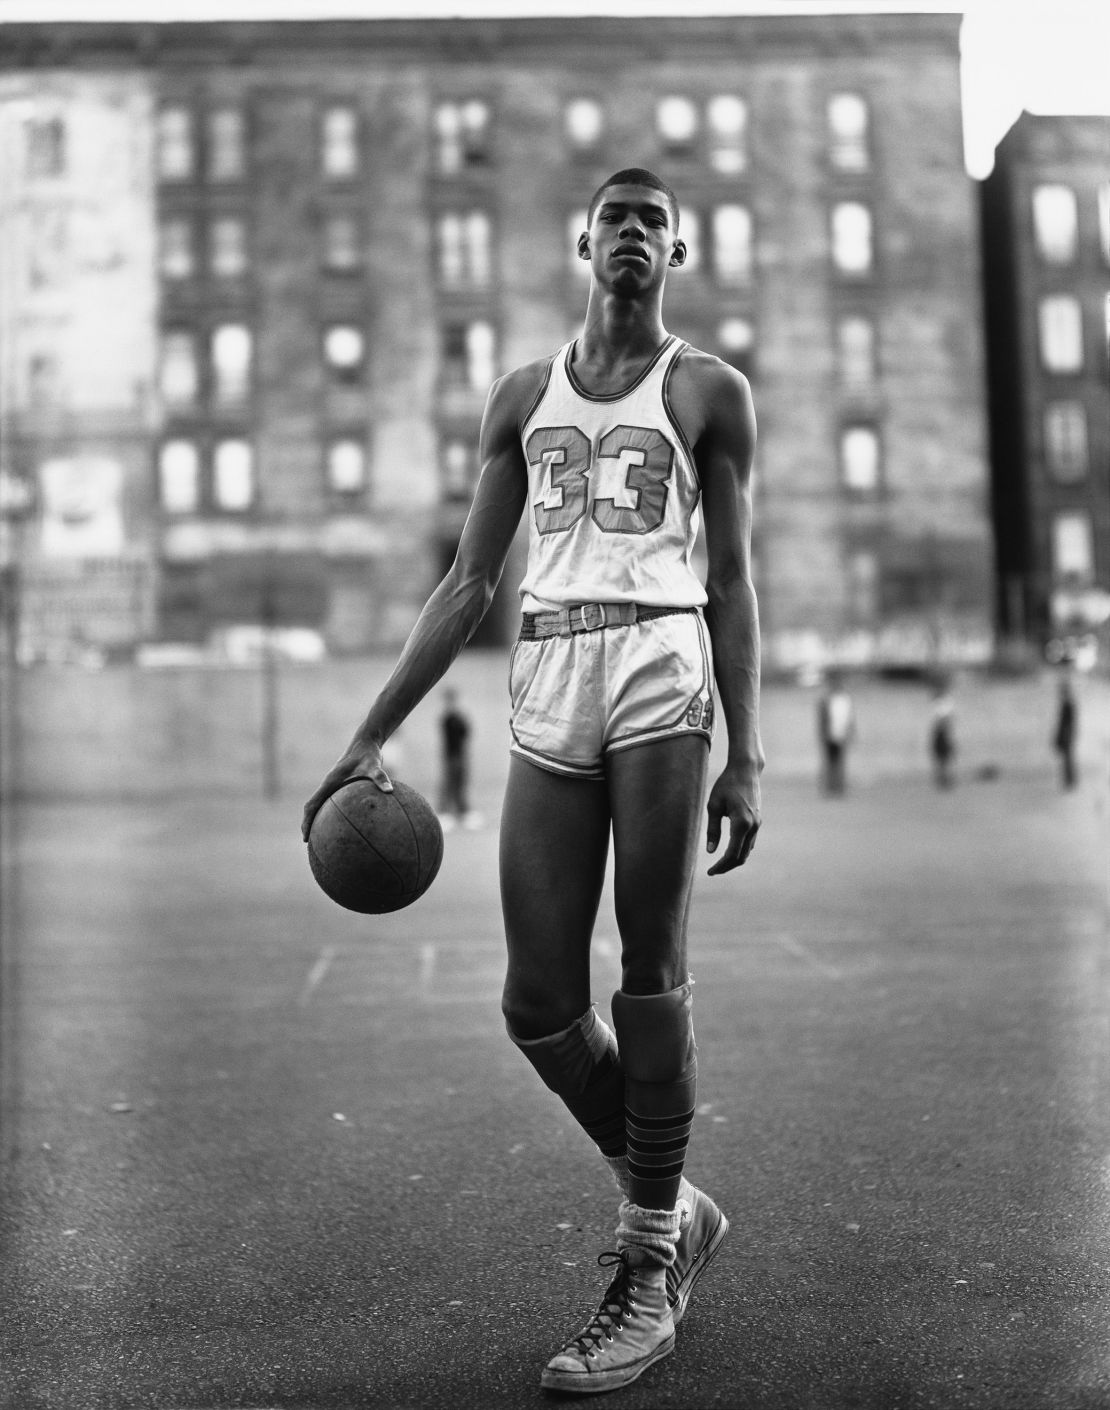 "Avedon's 1963 photograph of Lew Alcindor, the star center of Power Memorial Academy in New York City — long before he changed his name to Kareem Abdul-Jabbar — is a celebration of the human form," documentary filmmaker Ken Burns said. "There's a coolness and natural calm in the composition, from the ease with which he grasps the basketball to the casual crossing of his feet."